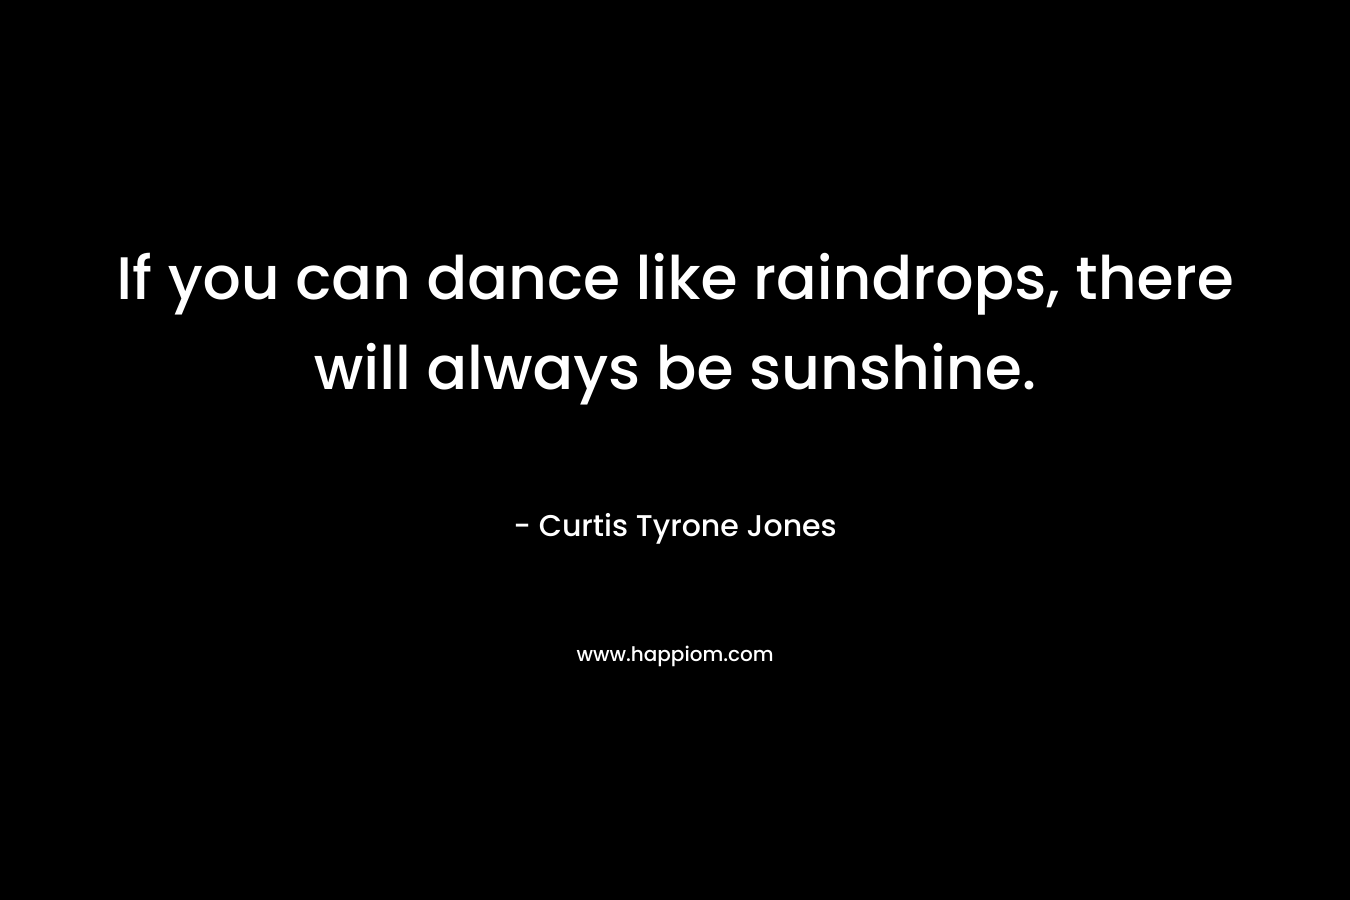 If you can dance like raindrops, there will always be sunshine.